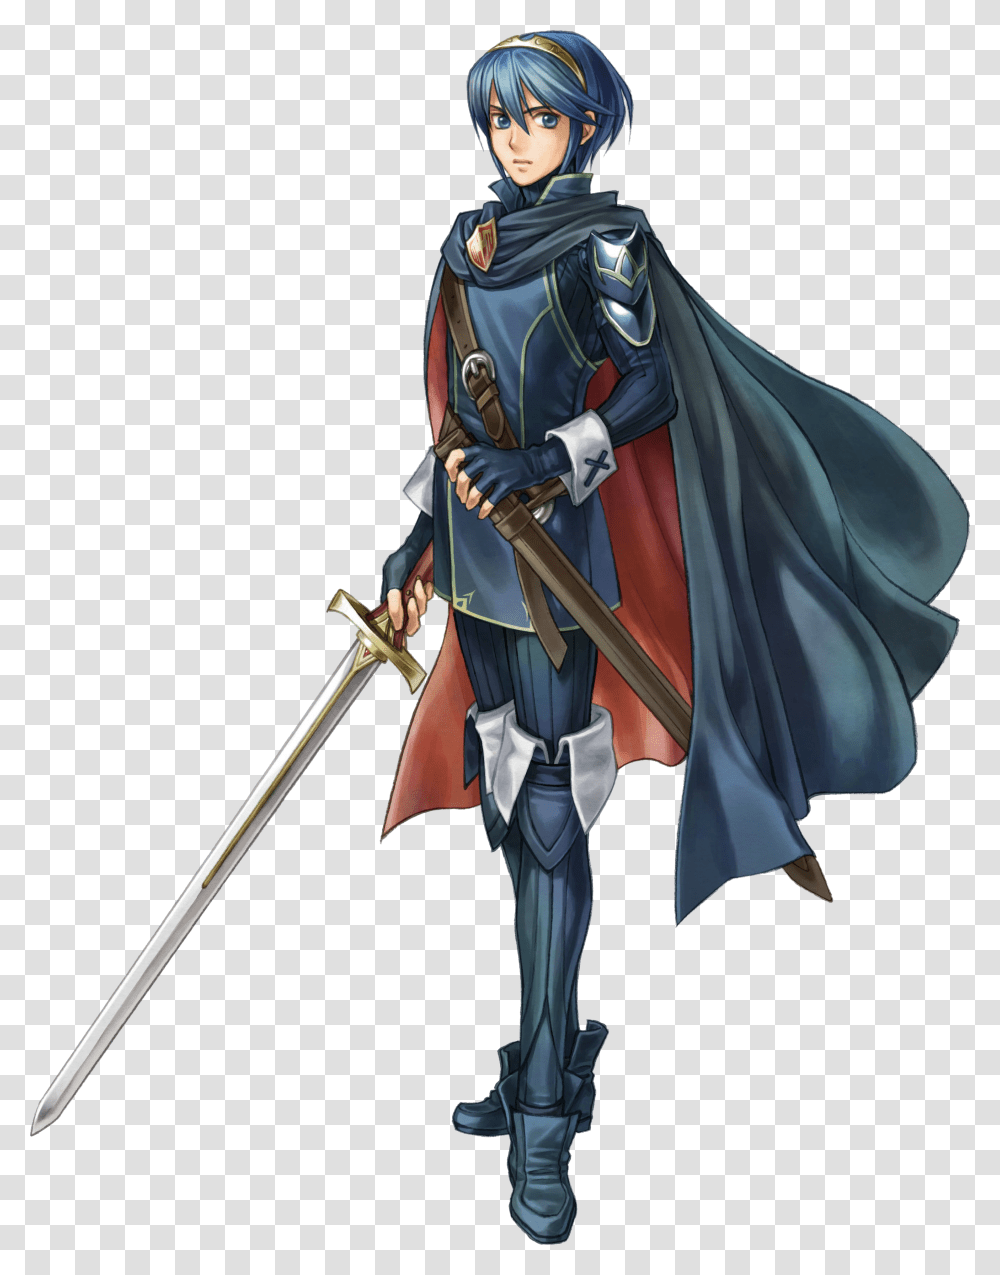 Lucina Looks More Like Marth Thanwell Fire Emblem Marth, Person, Human, Helmet, Clothing Transparent Png